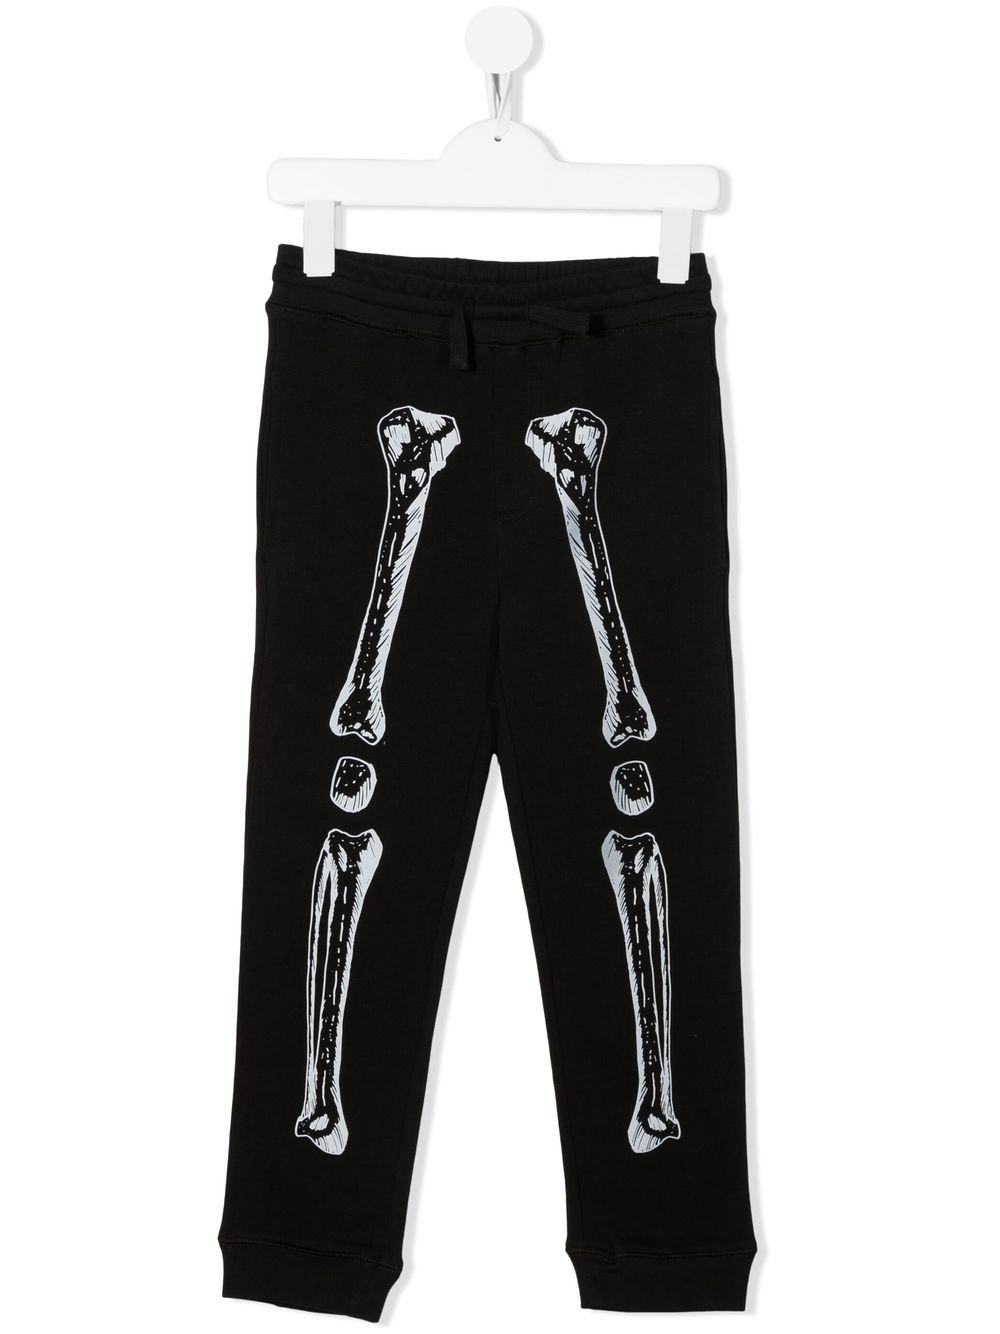 joggers with patches stella sandals mccartney kids trousers